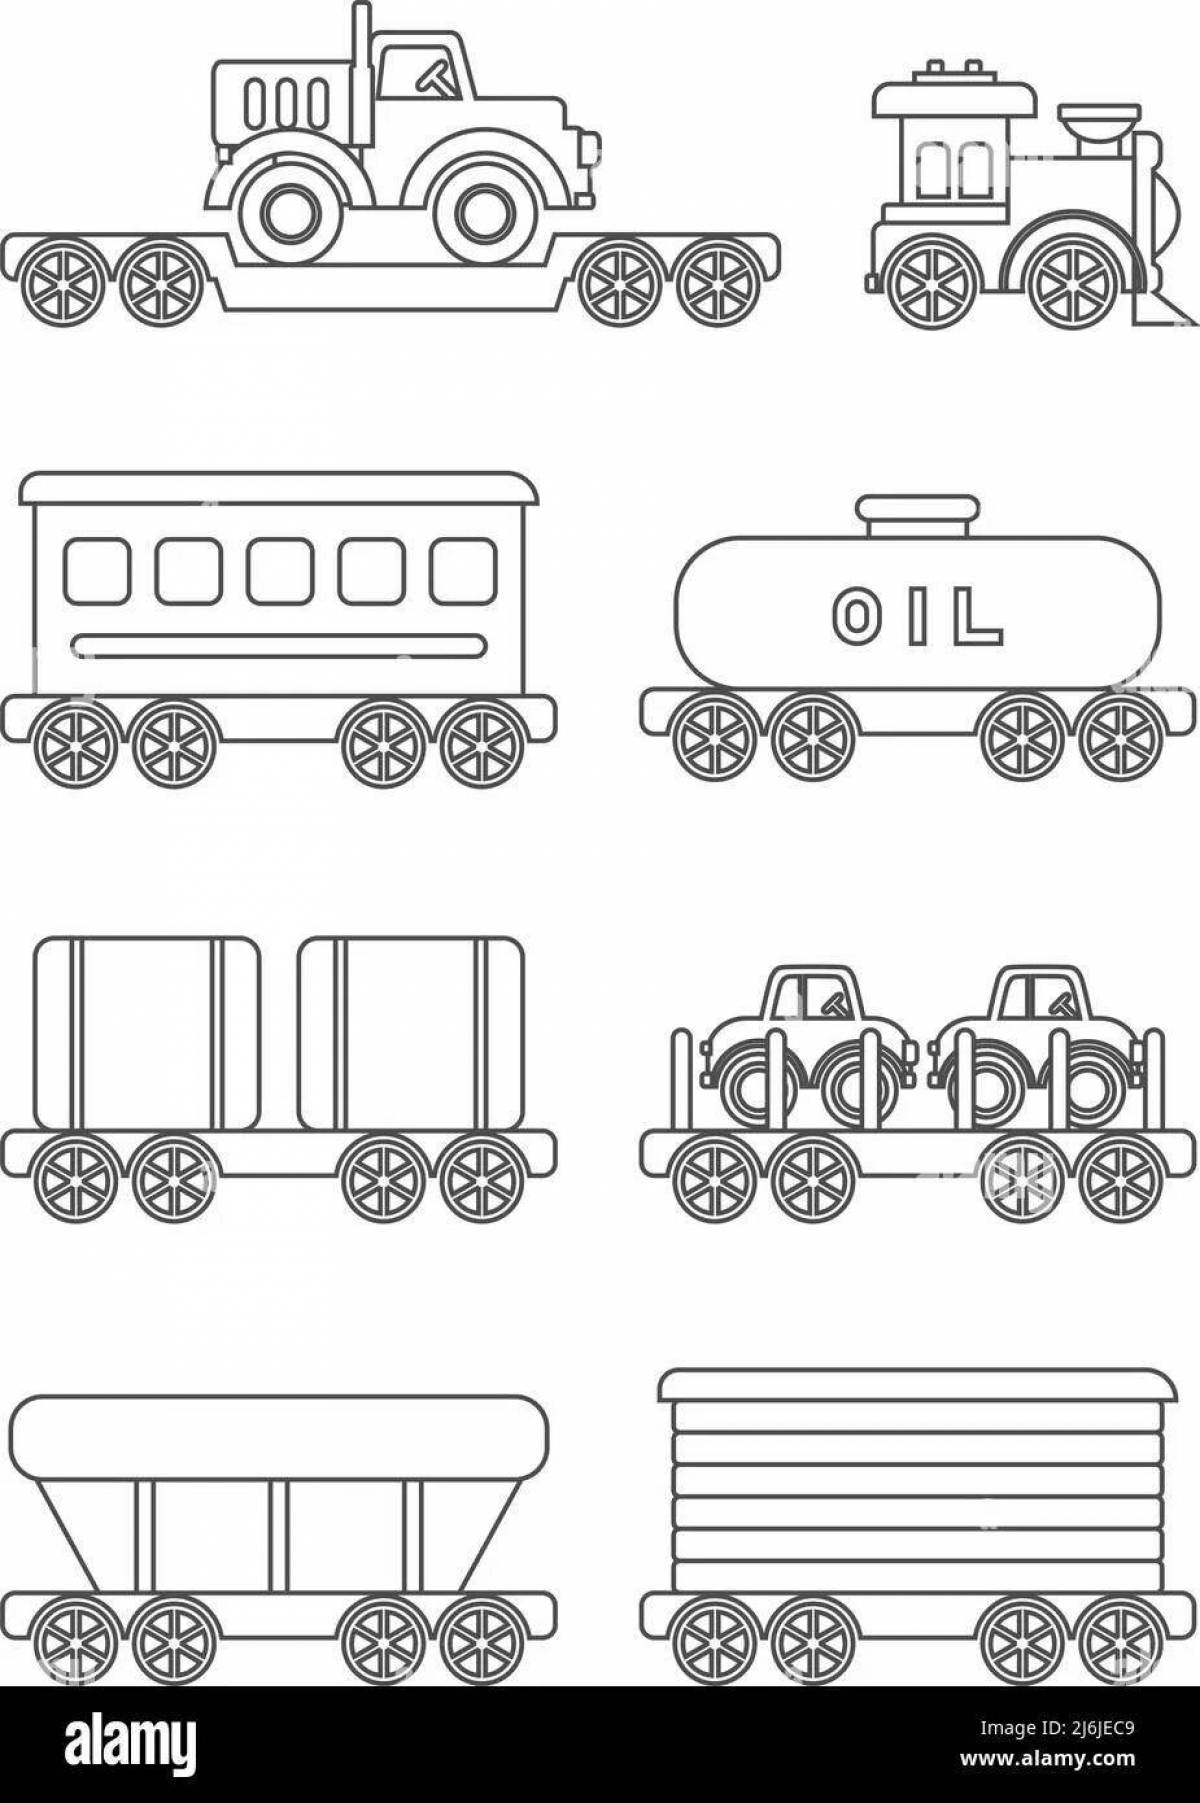 Impressive freight train coloring page for kids